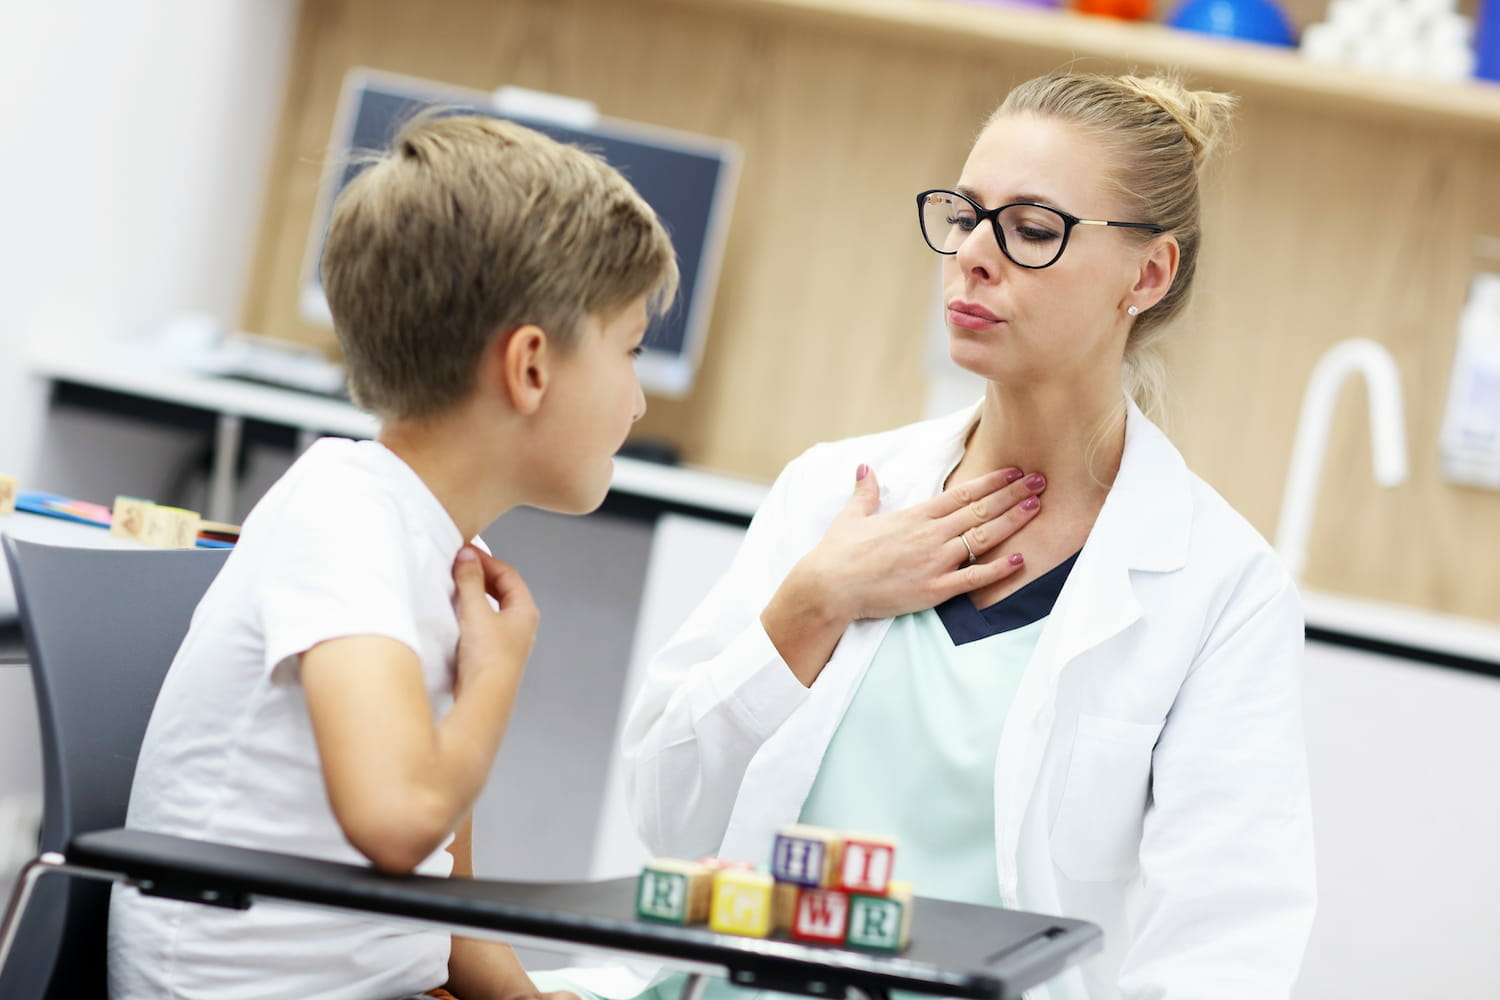 A paediatrician showing a child how speak